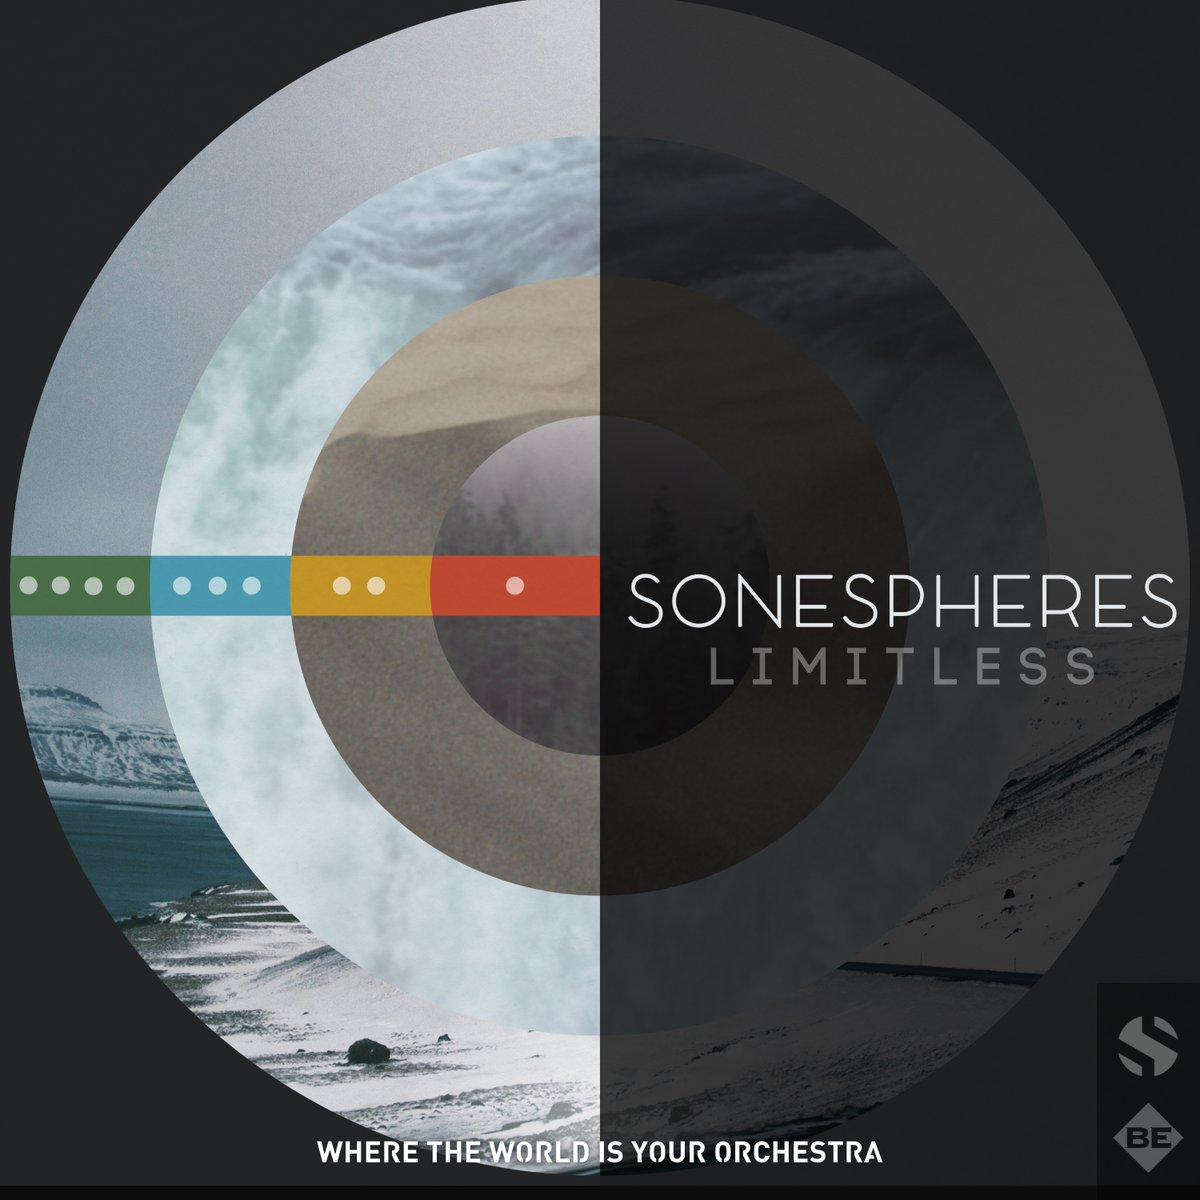 Introducing Sonespheres - Limitless ⚪ soundiron.com/products/sones… The ultimate compendium of all four Sonespheres in the series: Distance, Origins, Current, and Direction crafted in collaboration with film/TV composer Blake Ewing. On sale now for only $149 (Reg. $179)